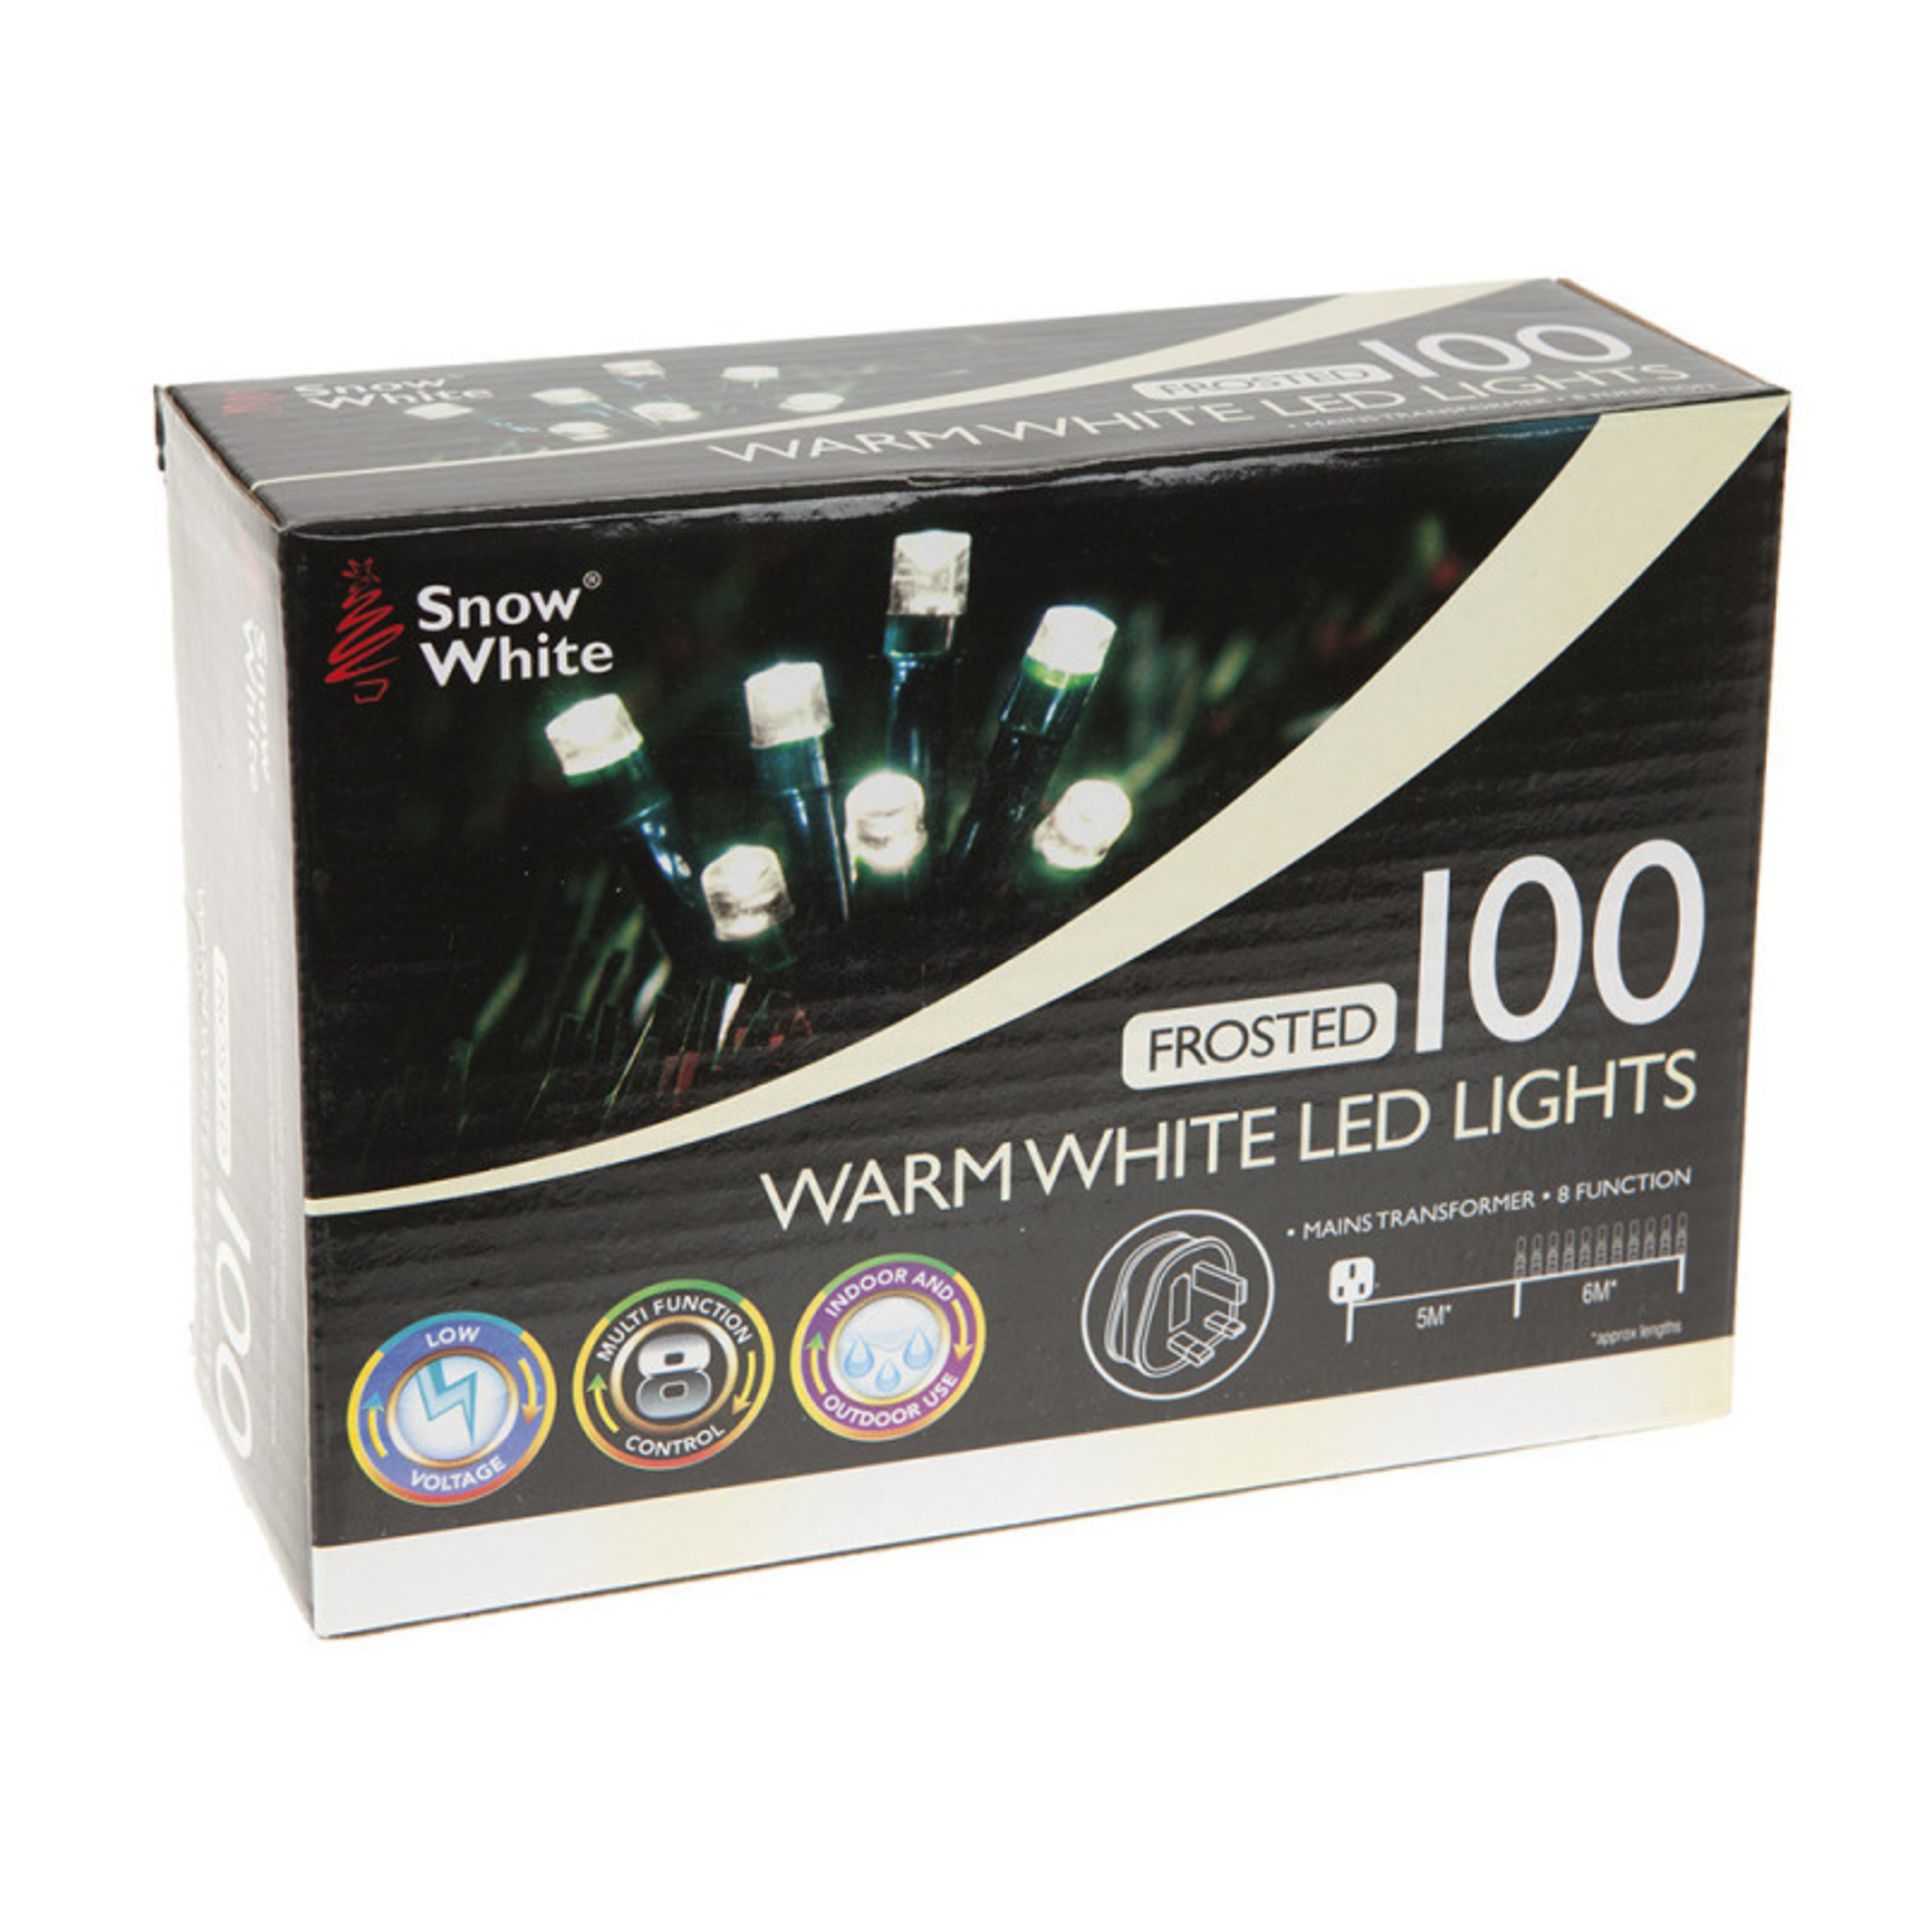 + VAT Brand New 100 Frosted Warm White LED Lights - Mains Transformer - 8 Functions